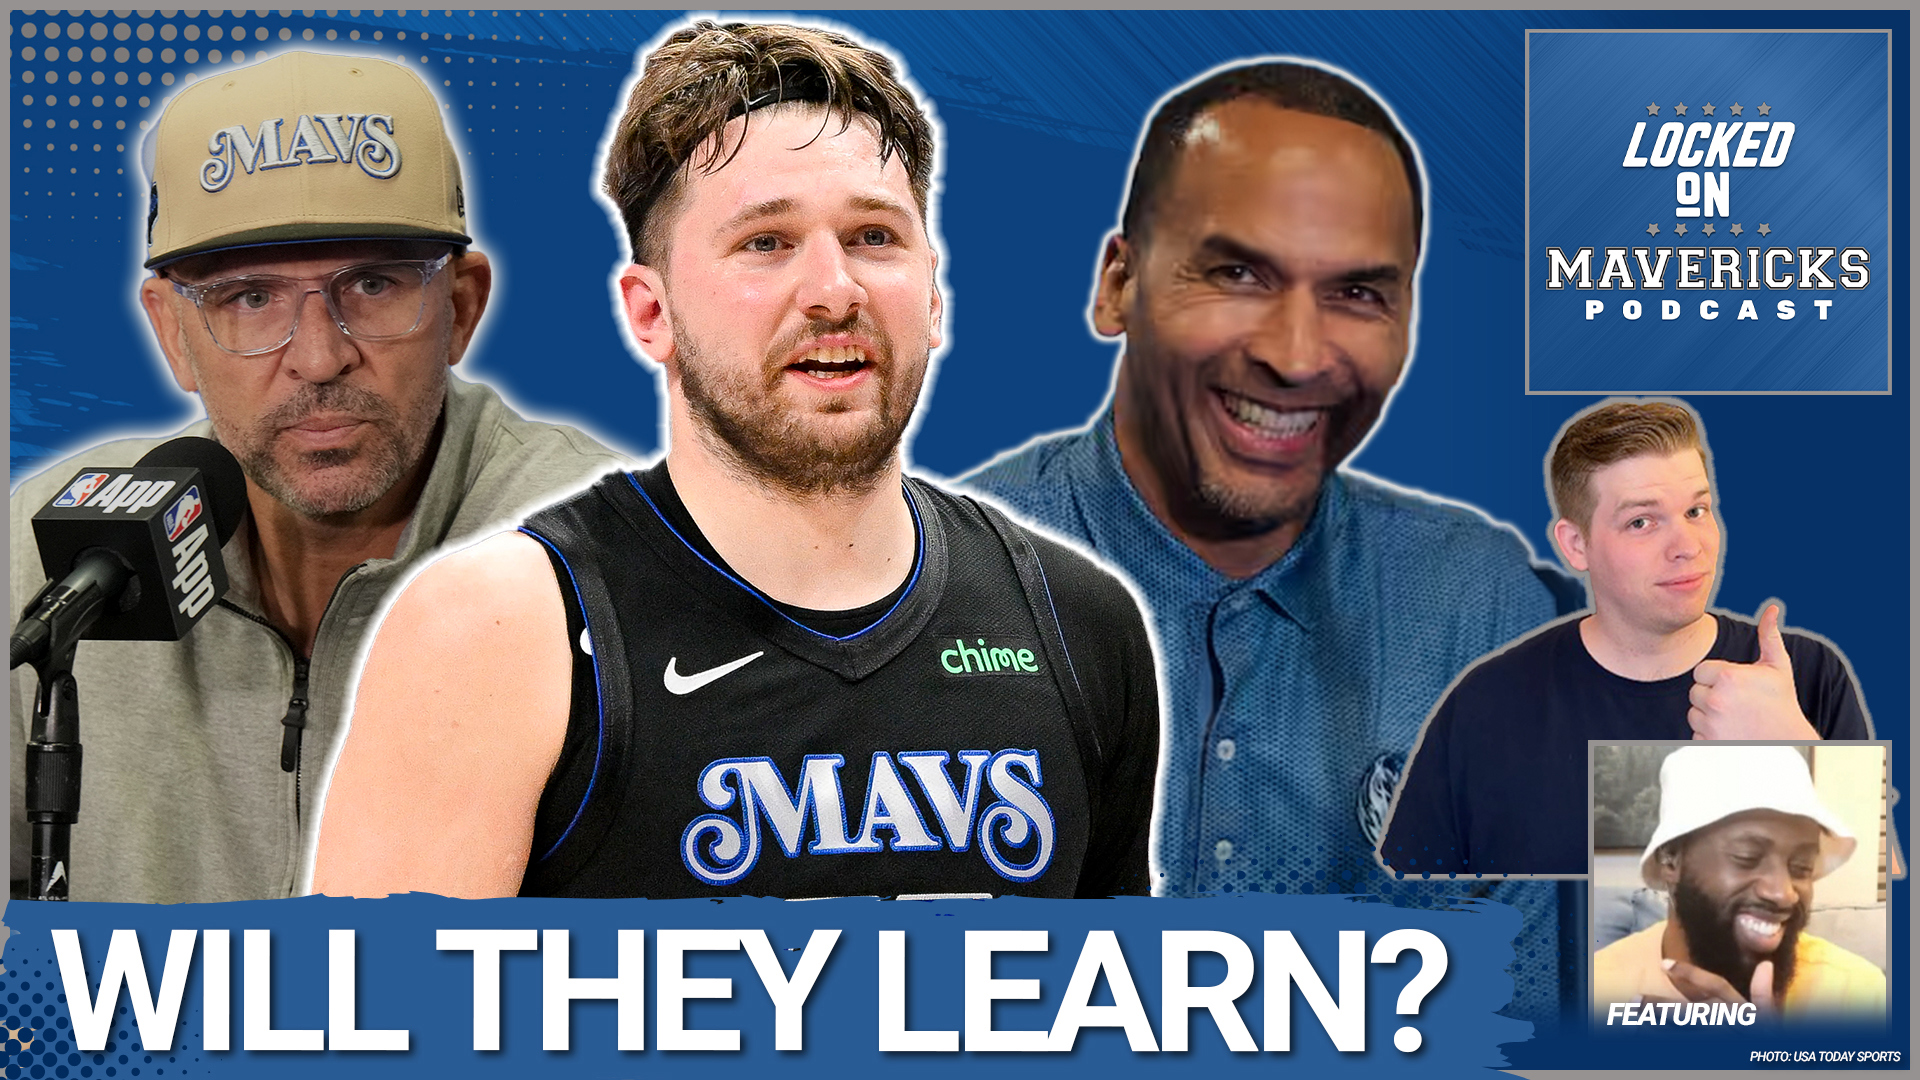 Nick Angstadt & Reggie Adetula share the lessons the Dallas Mavericks need to learn from their loss in the NBA Finals like Luka Doncic is always close.